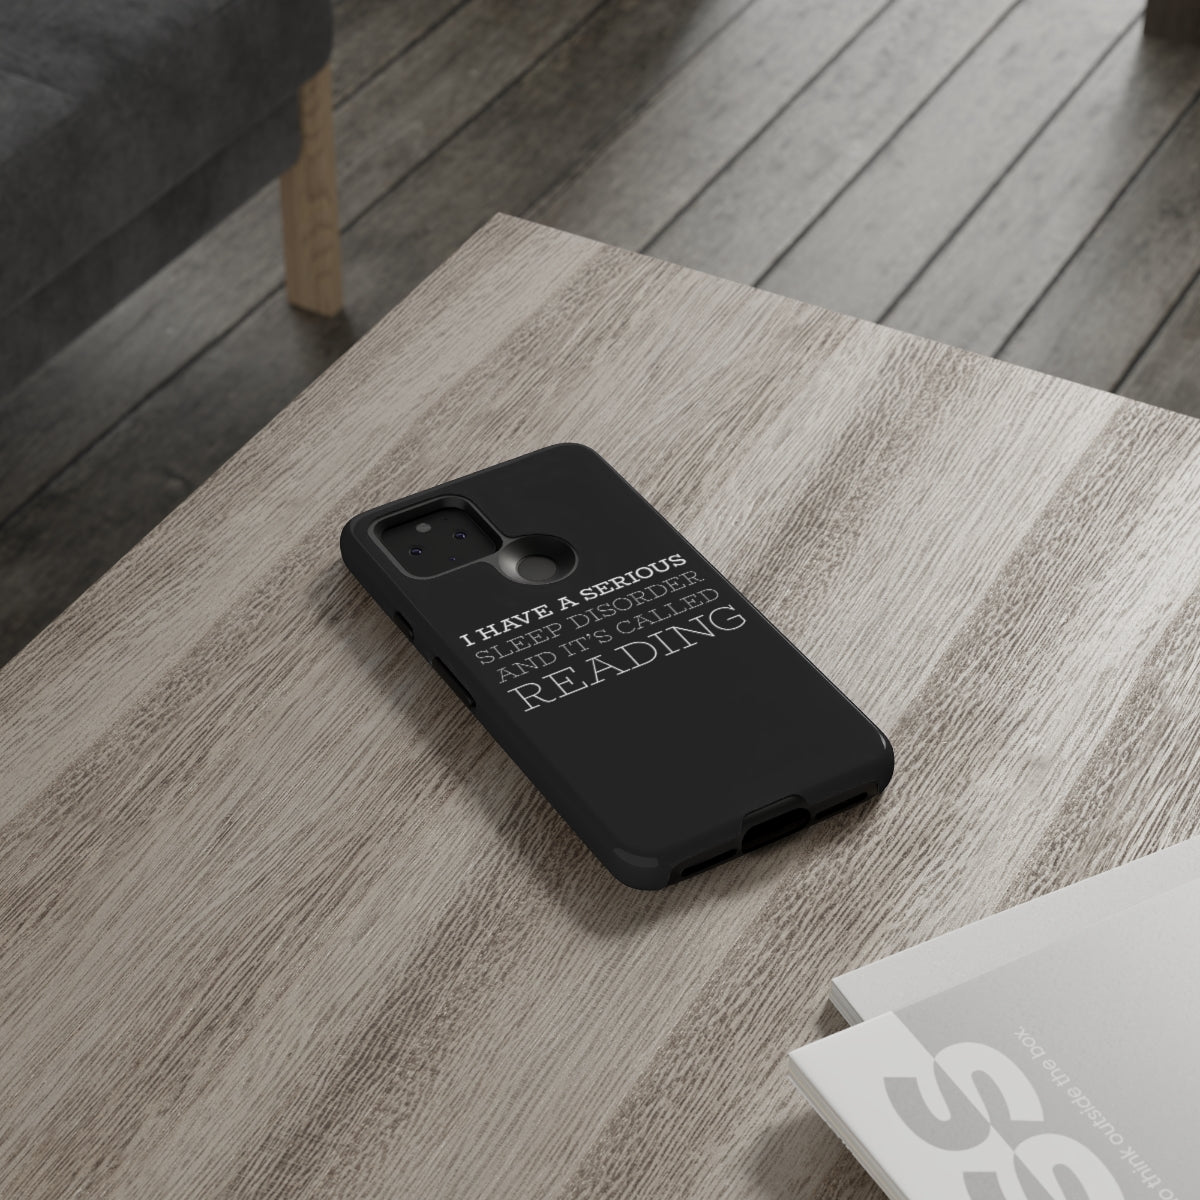 I HAVE A SERIOUS SLEEP DISORDER Phone Case - Literary Lifestyle Company